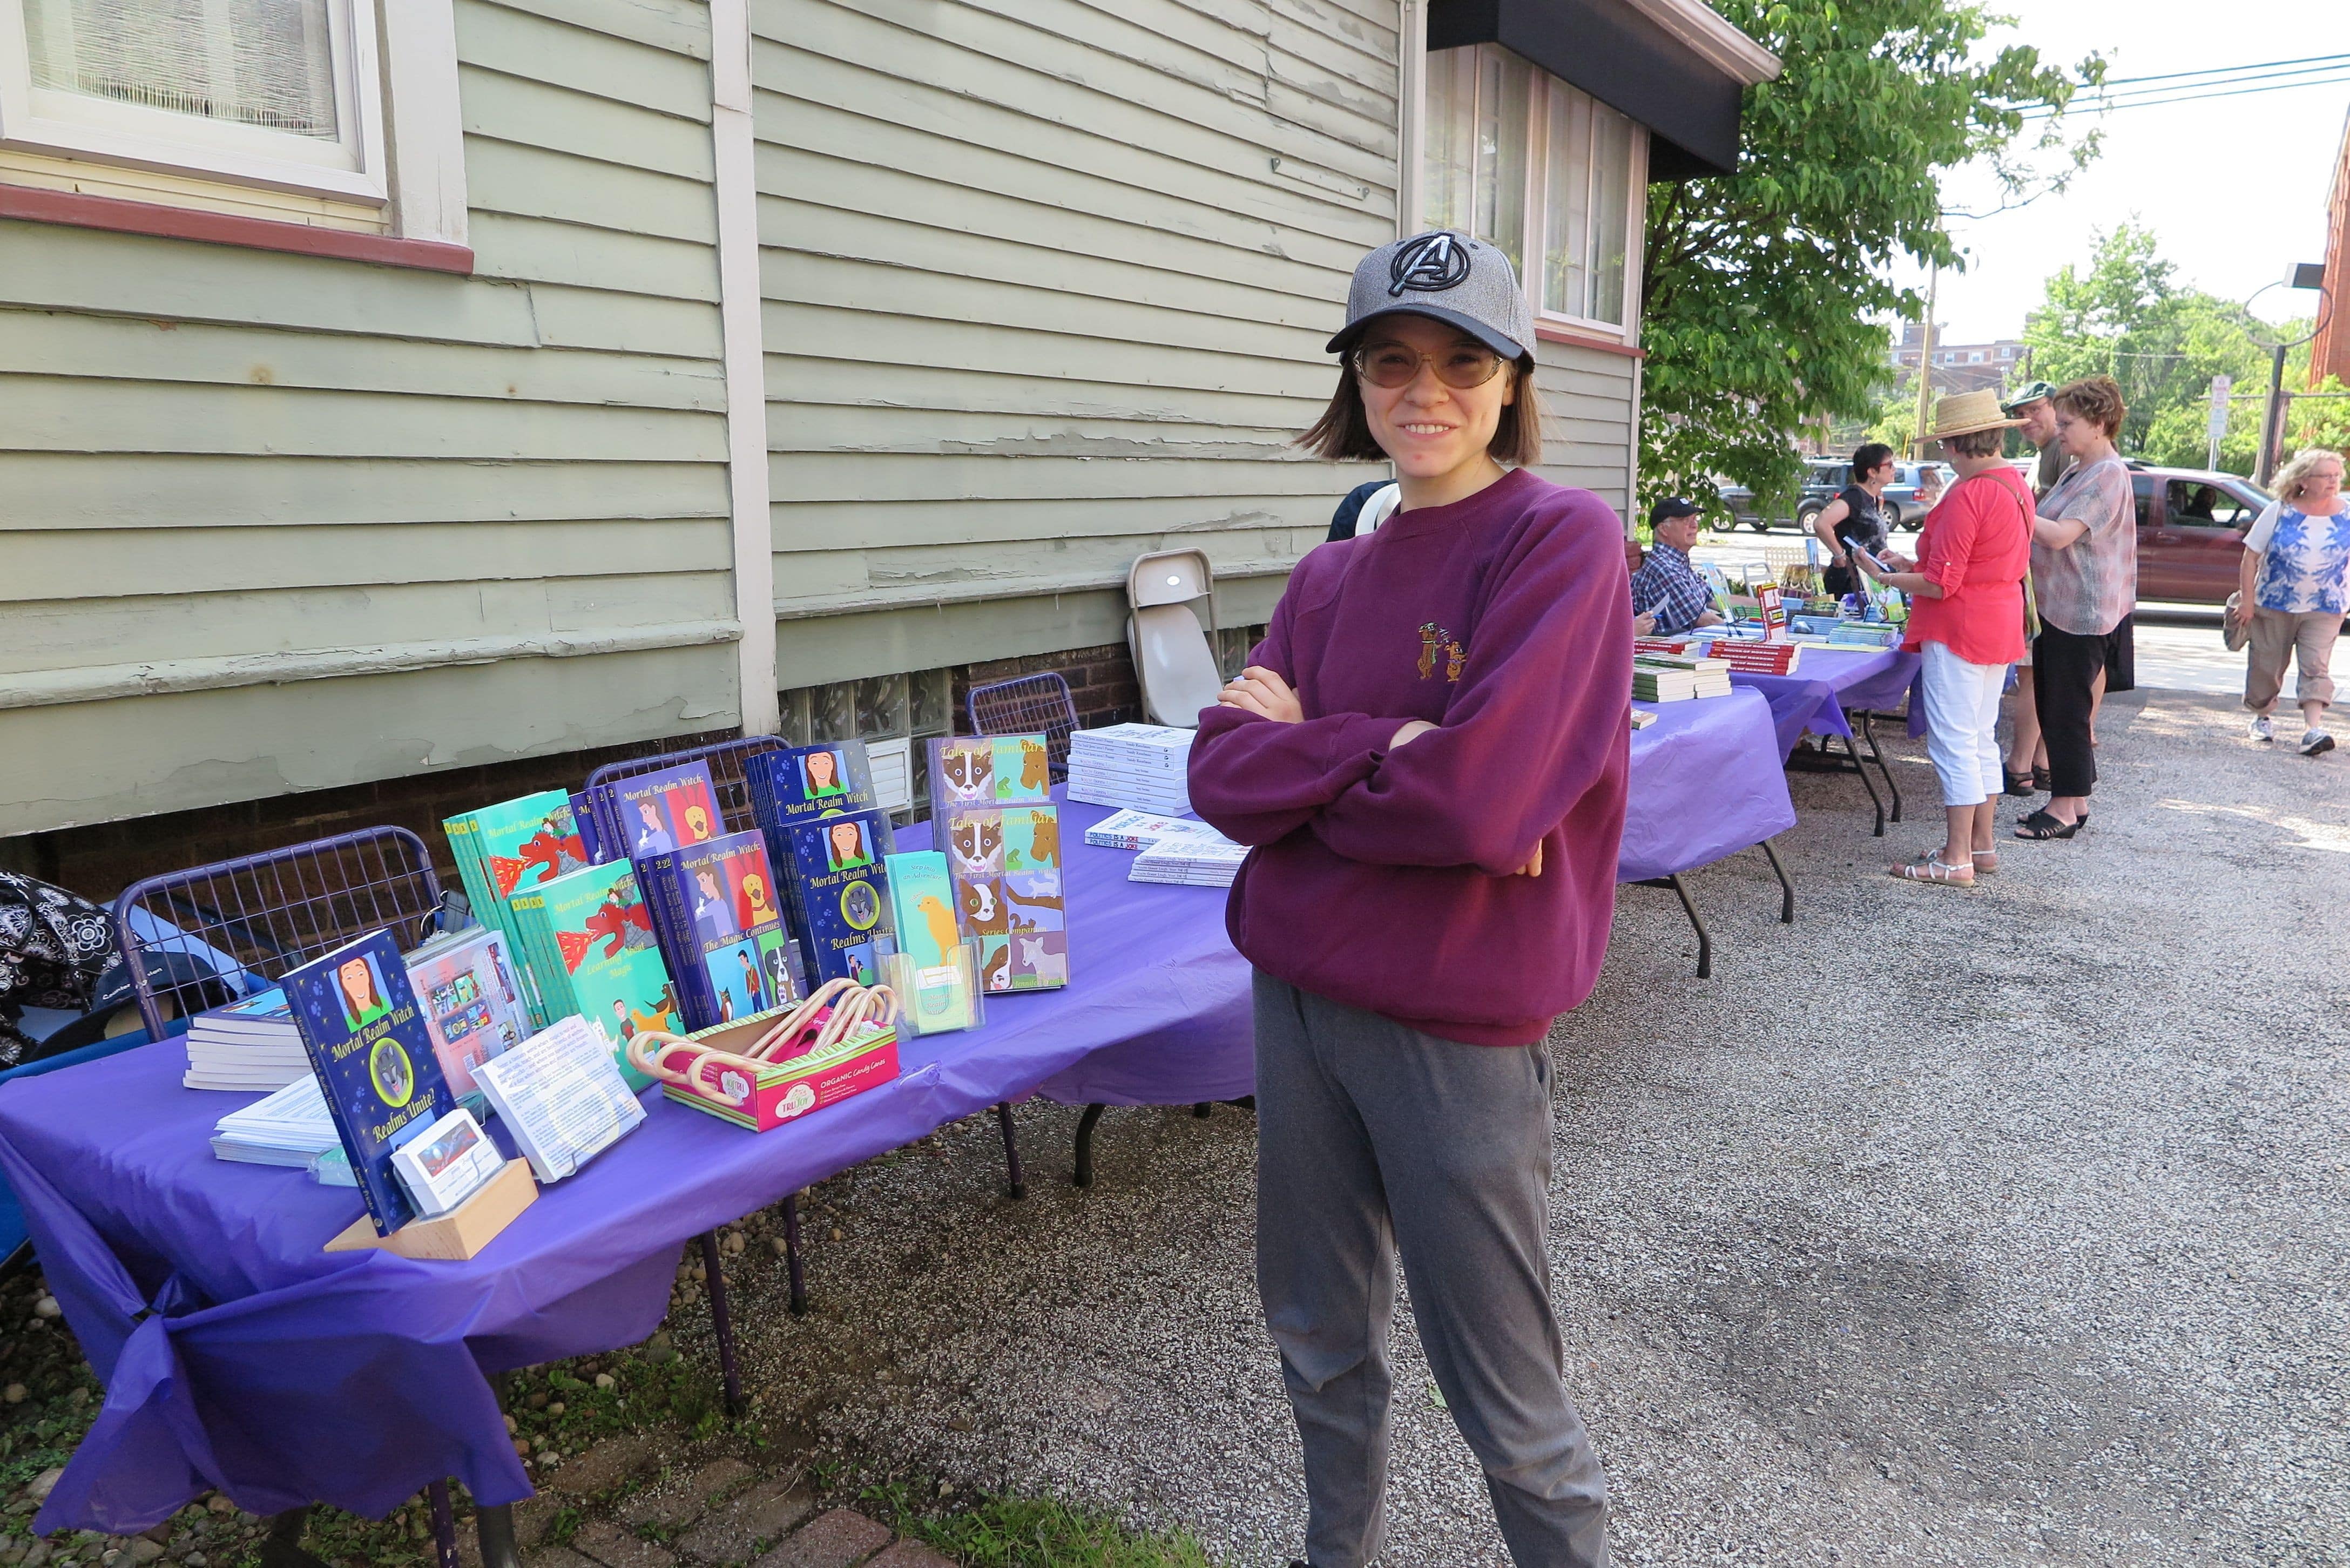 Jennifer Priester with her books at an outdoor vendor event.